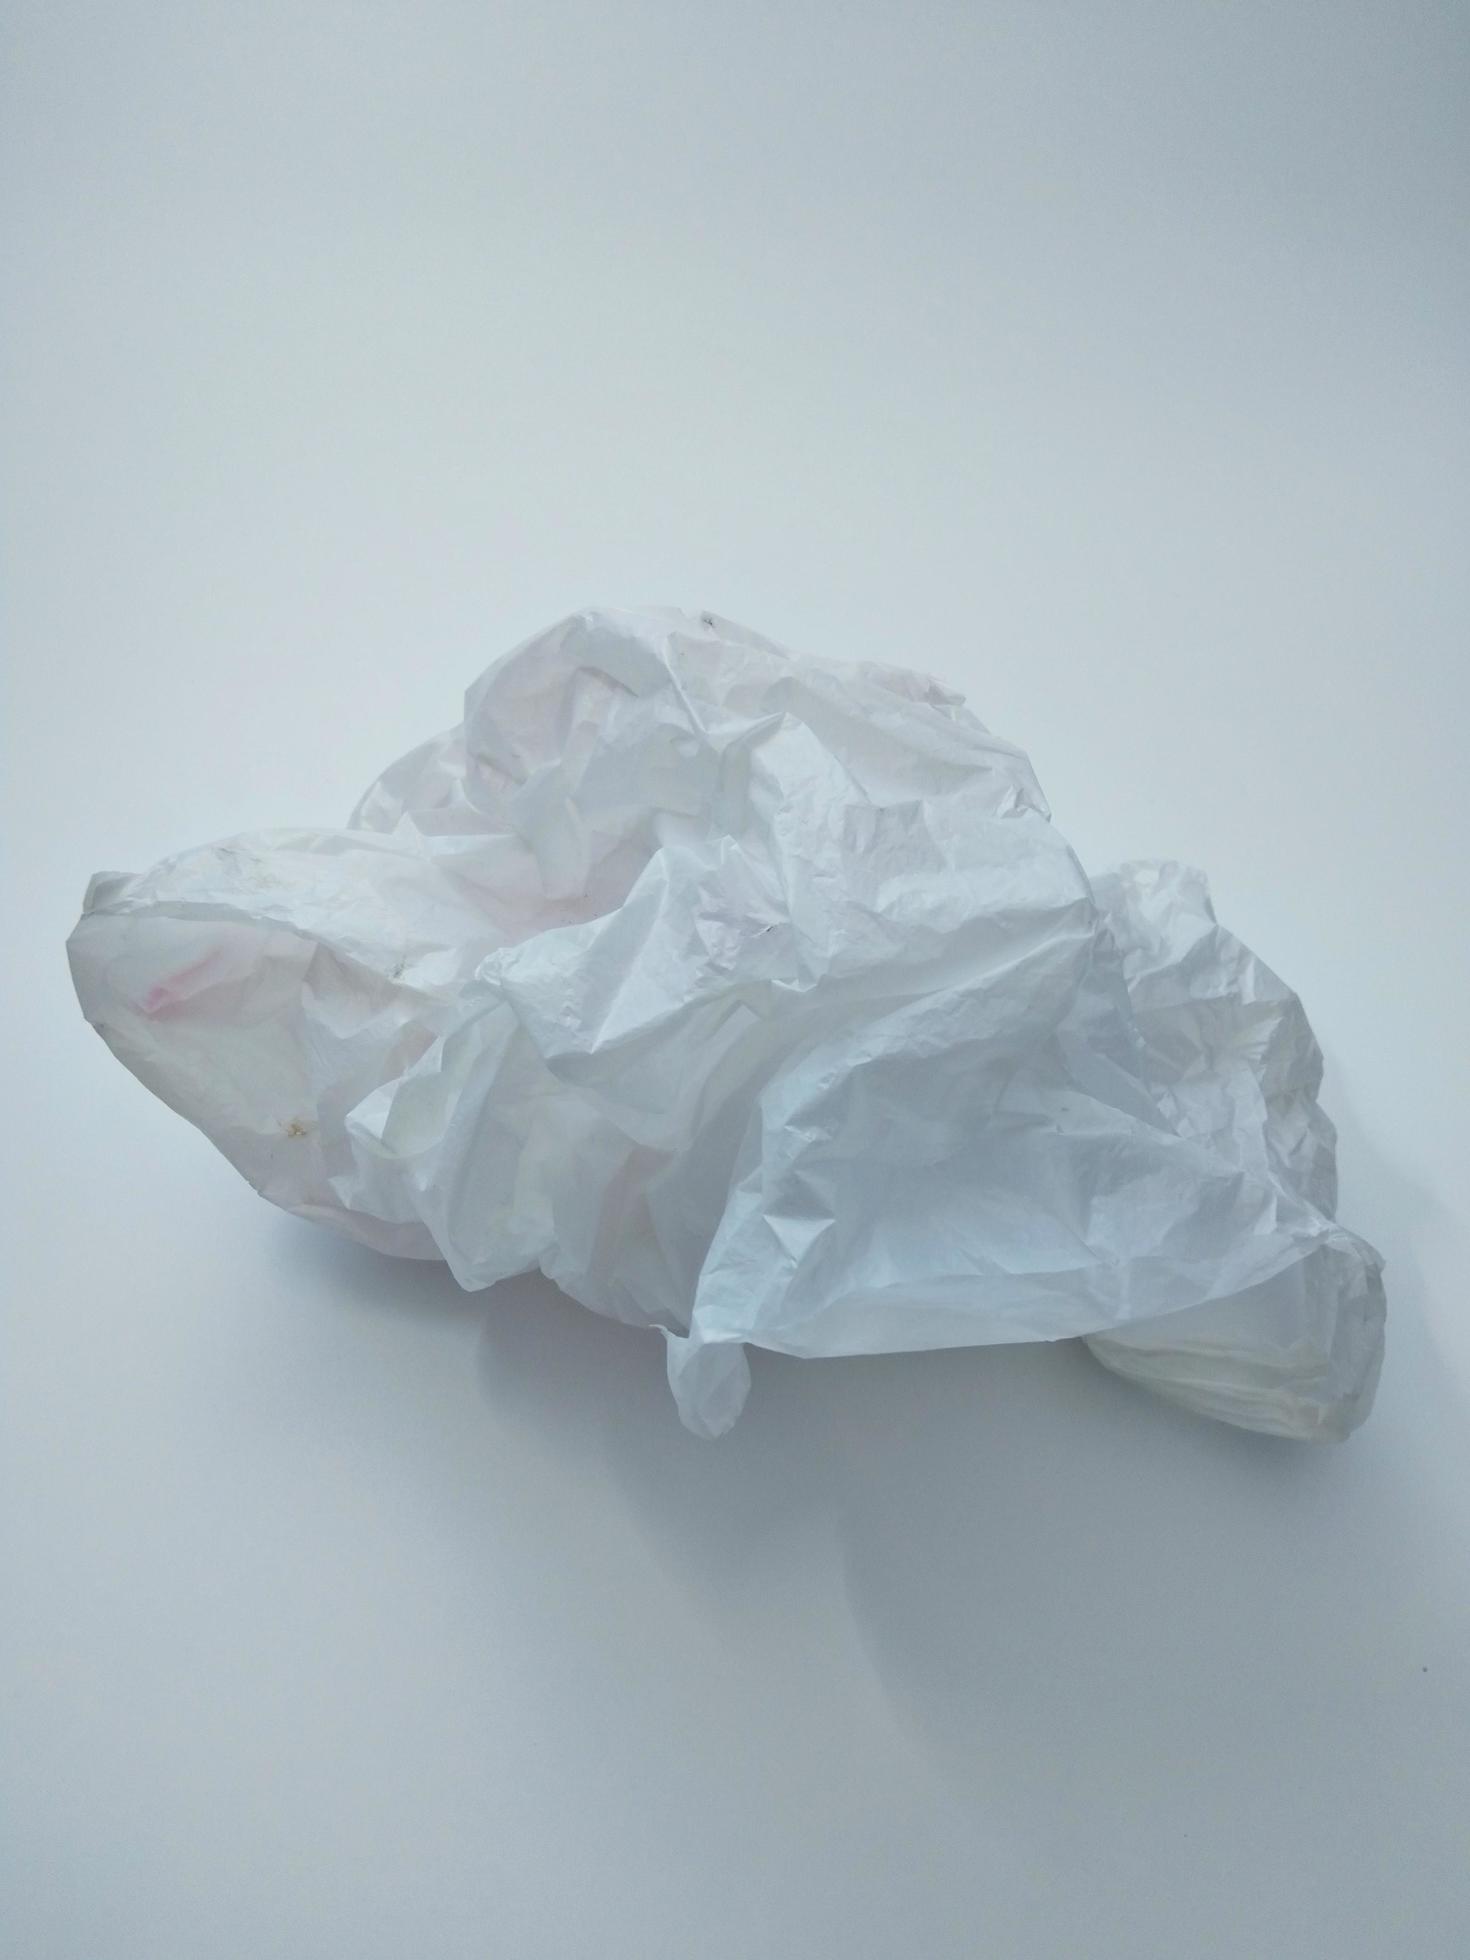 Crumpled Used Transparent Plastic Bag Isolated On White Background